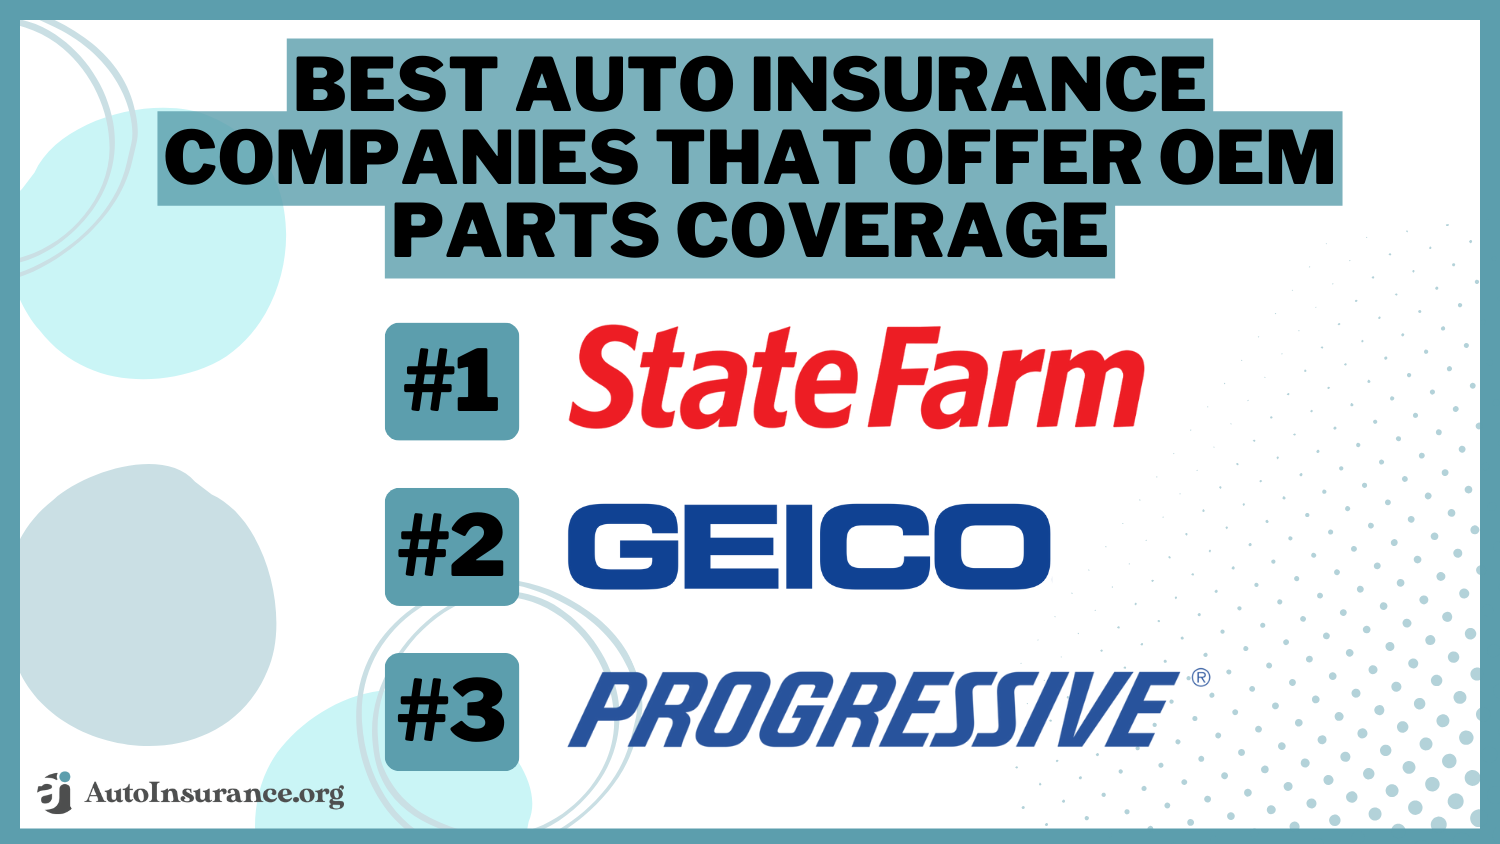 best auto insurance companies that offer OEM parts coverage: State Farm, Geico, Progressive